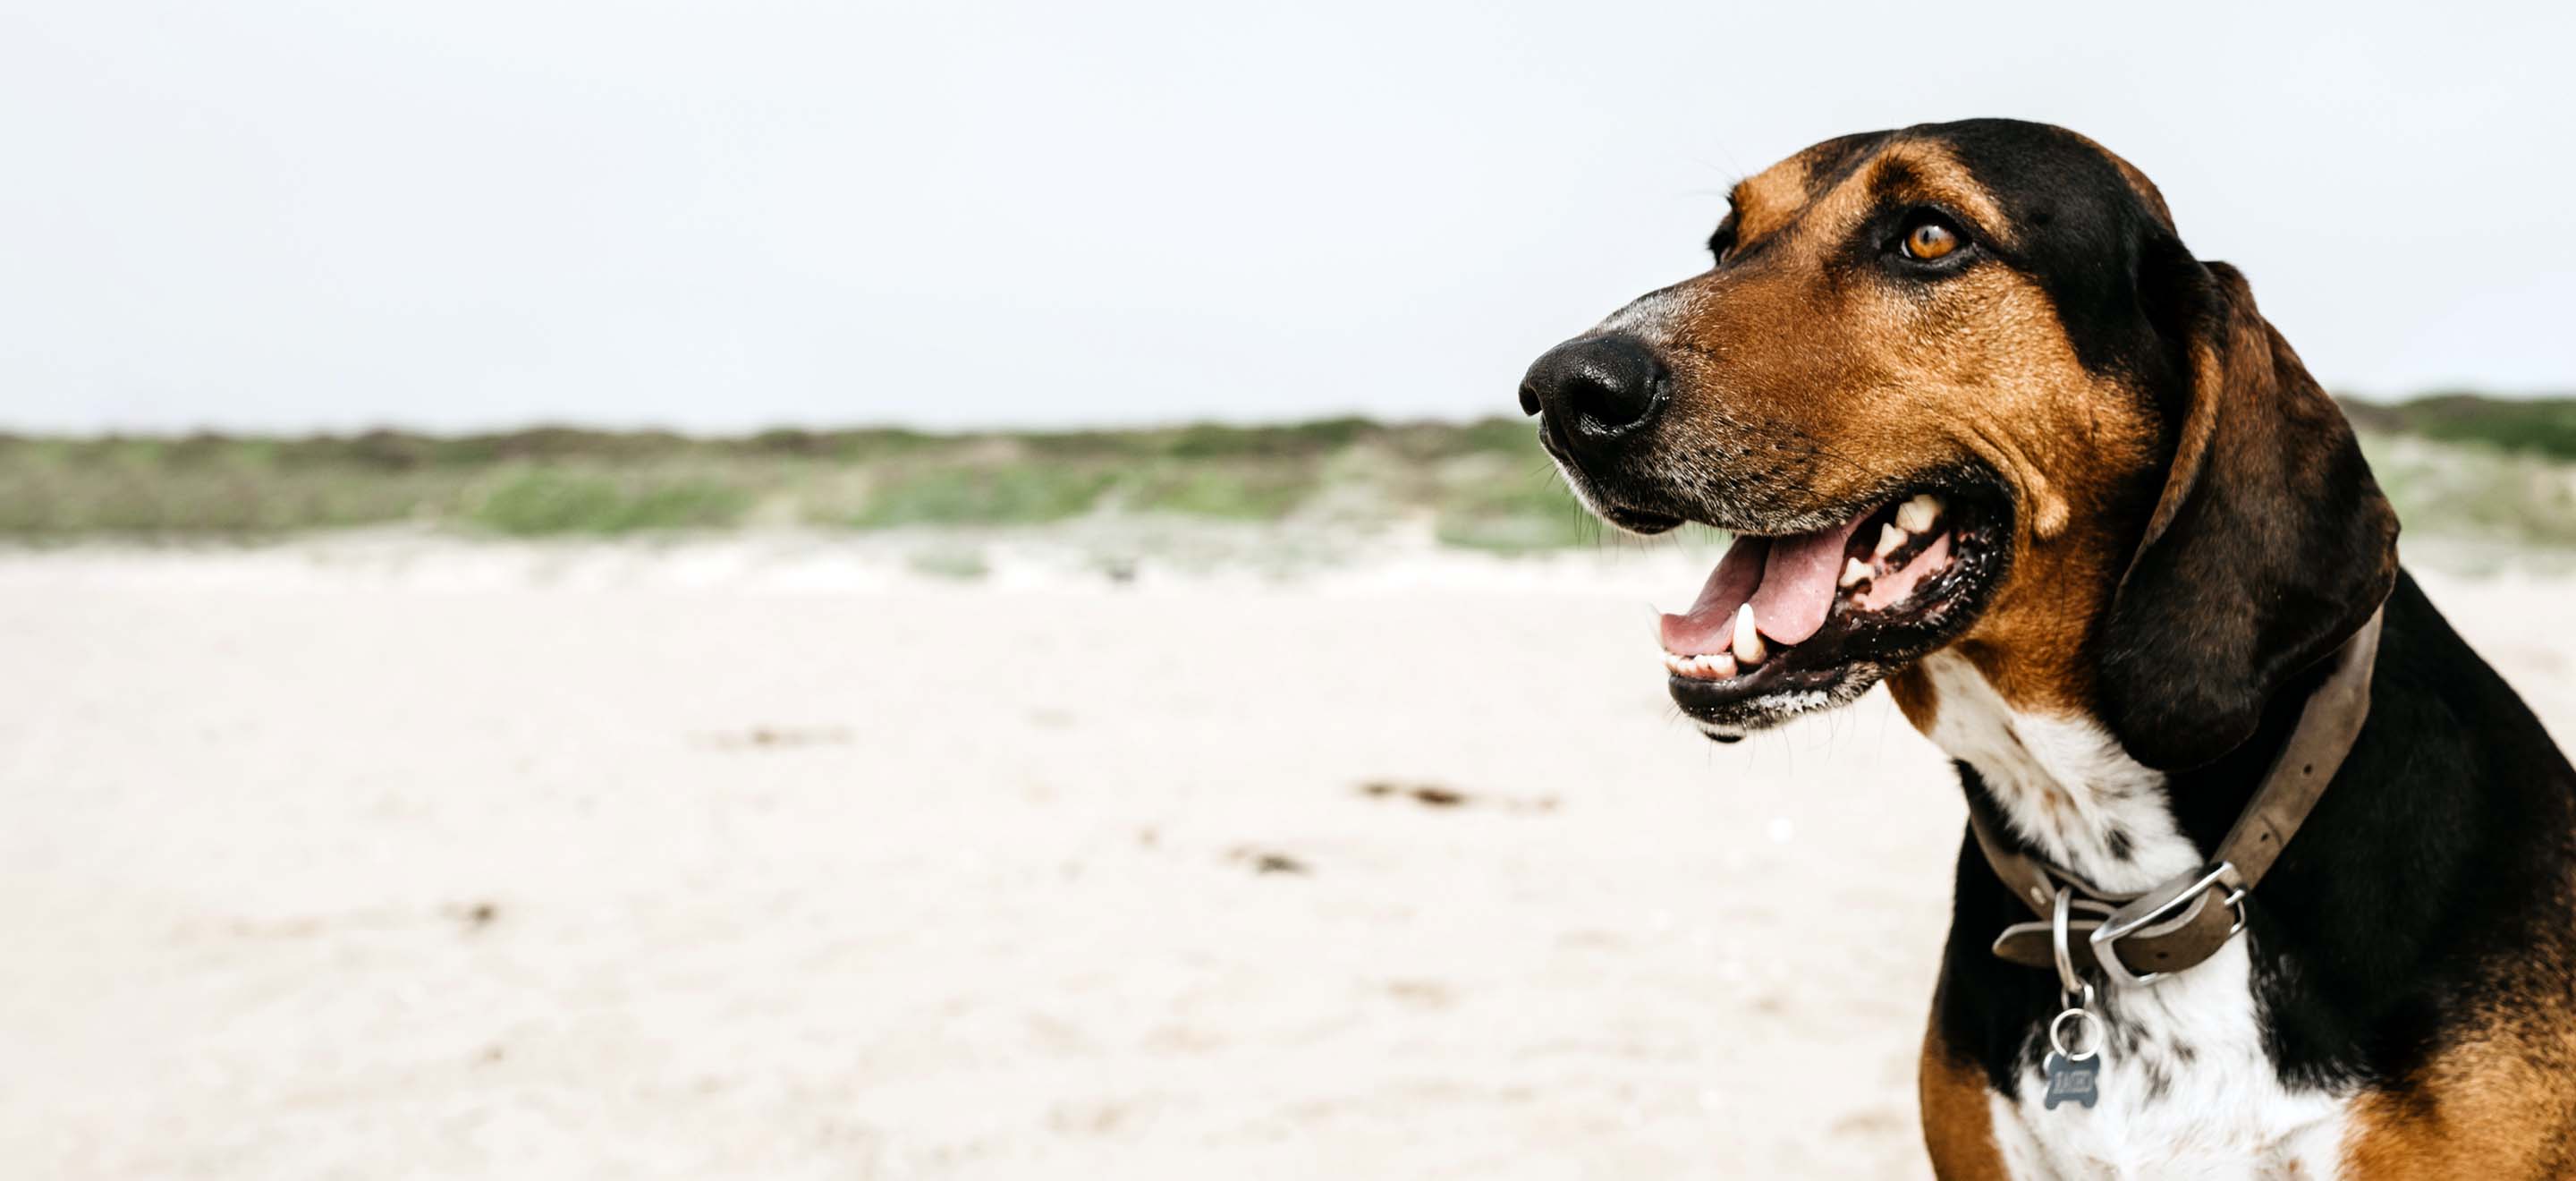 A close-up of a Coonhound dog standing in a sandy area image